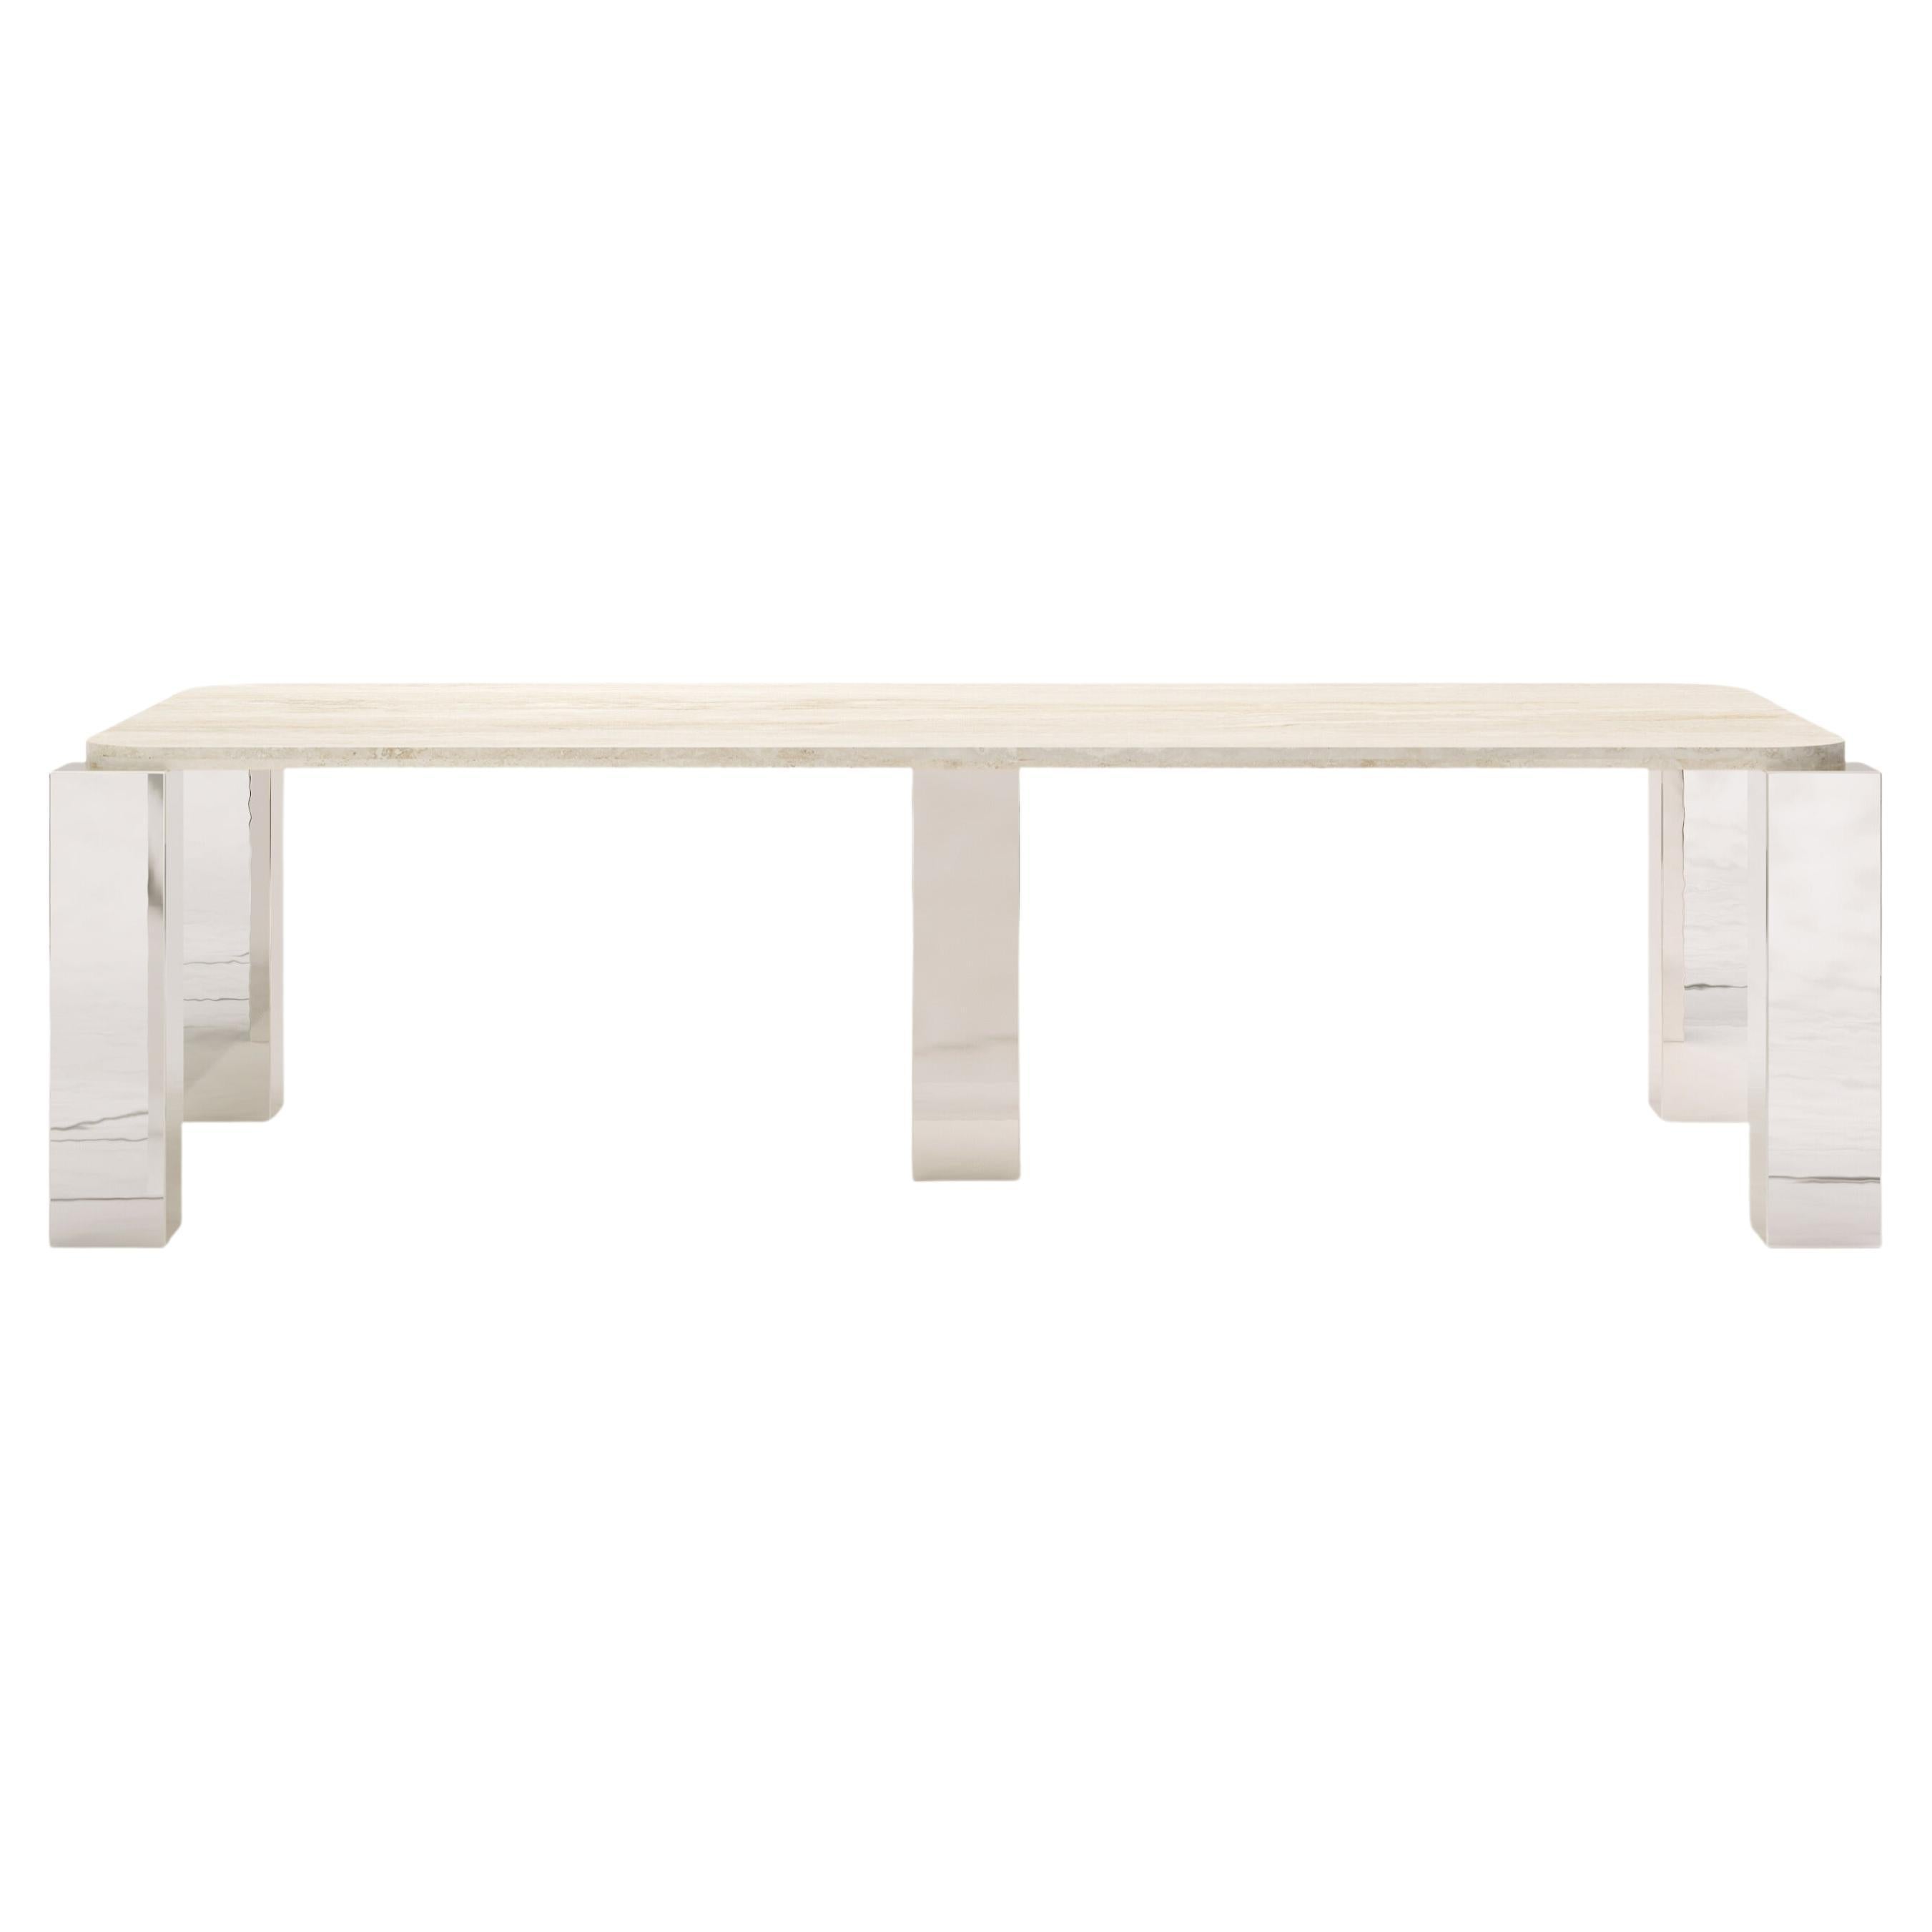 FORM(LA) Cubo Rectangle Dining Table 86”L x 44”W x 30”H Travertino & Chrome For Sale